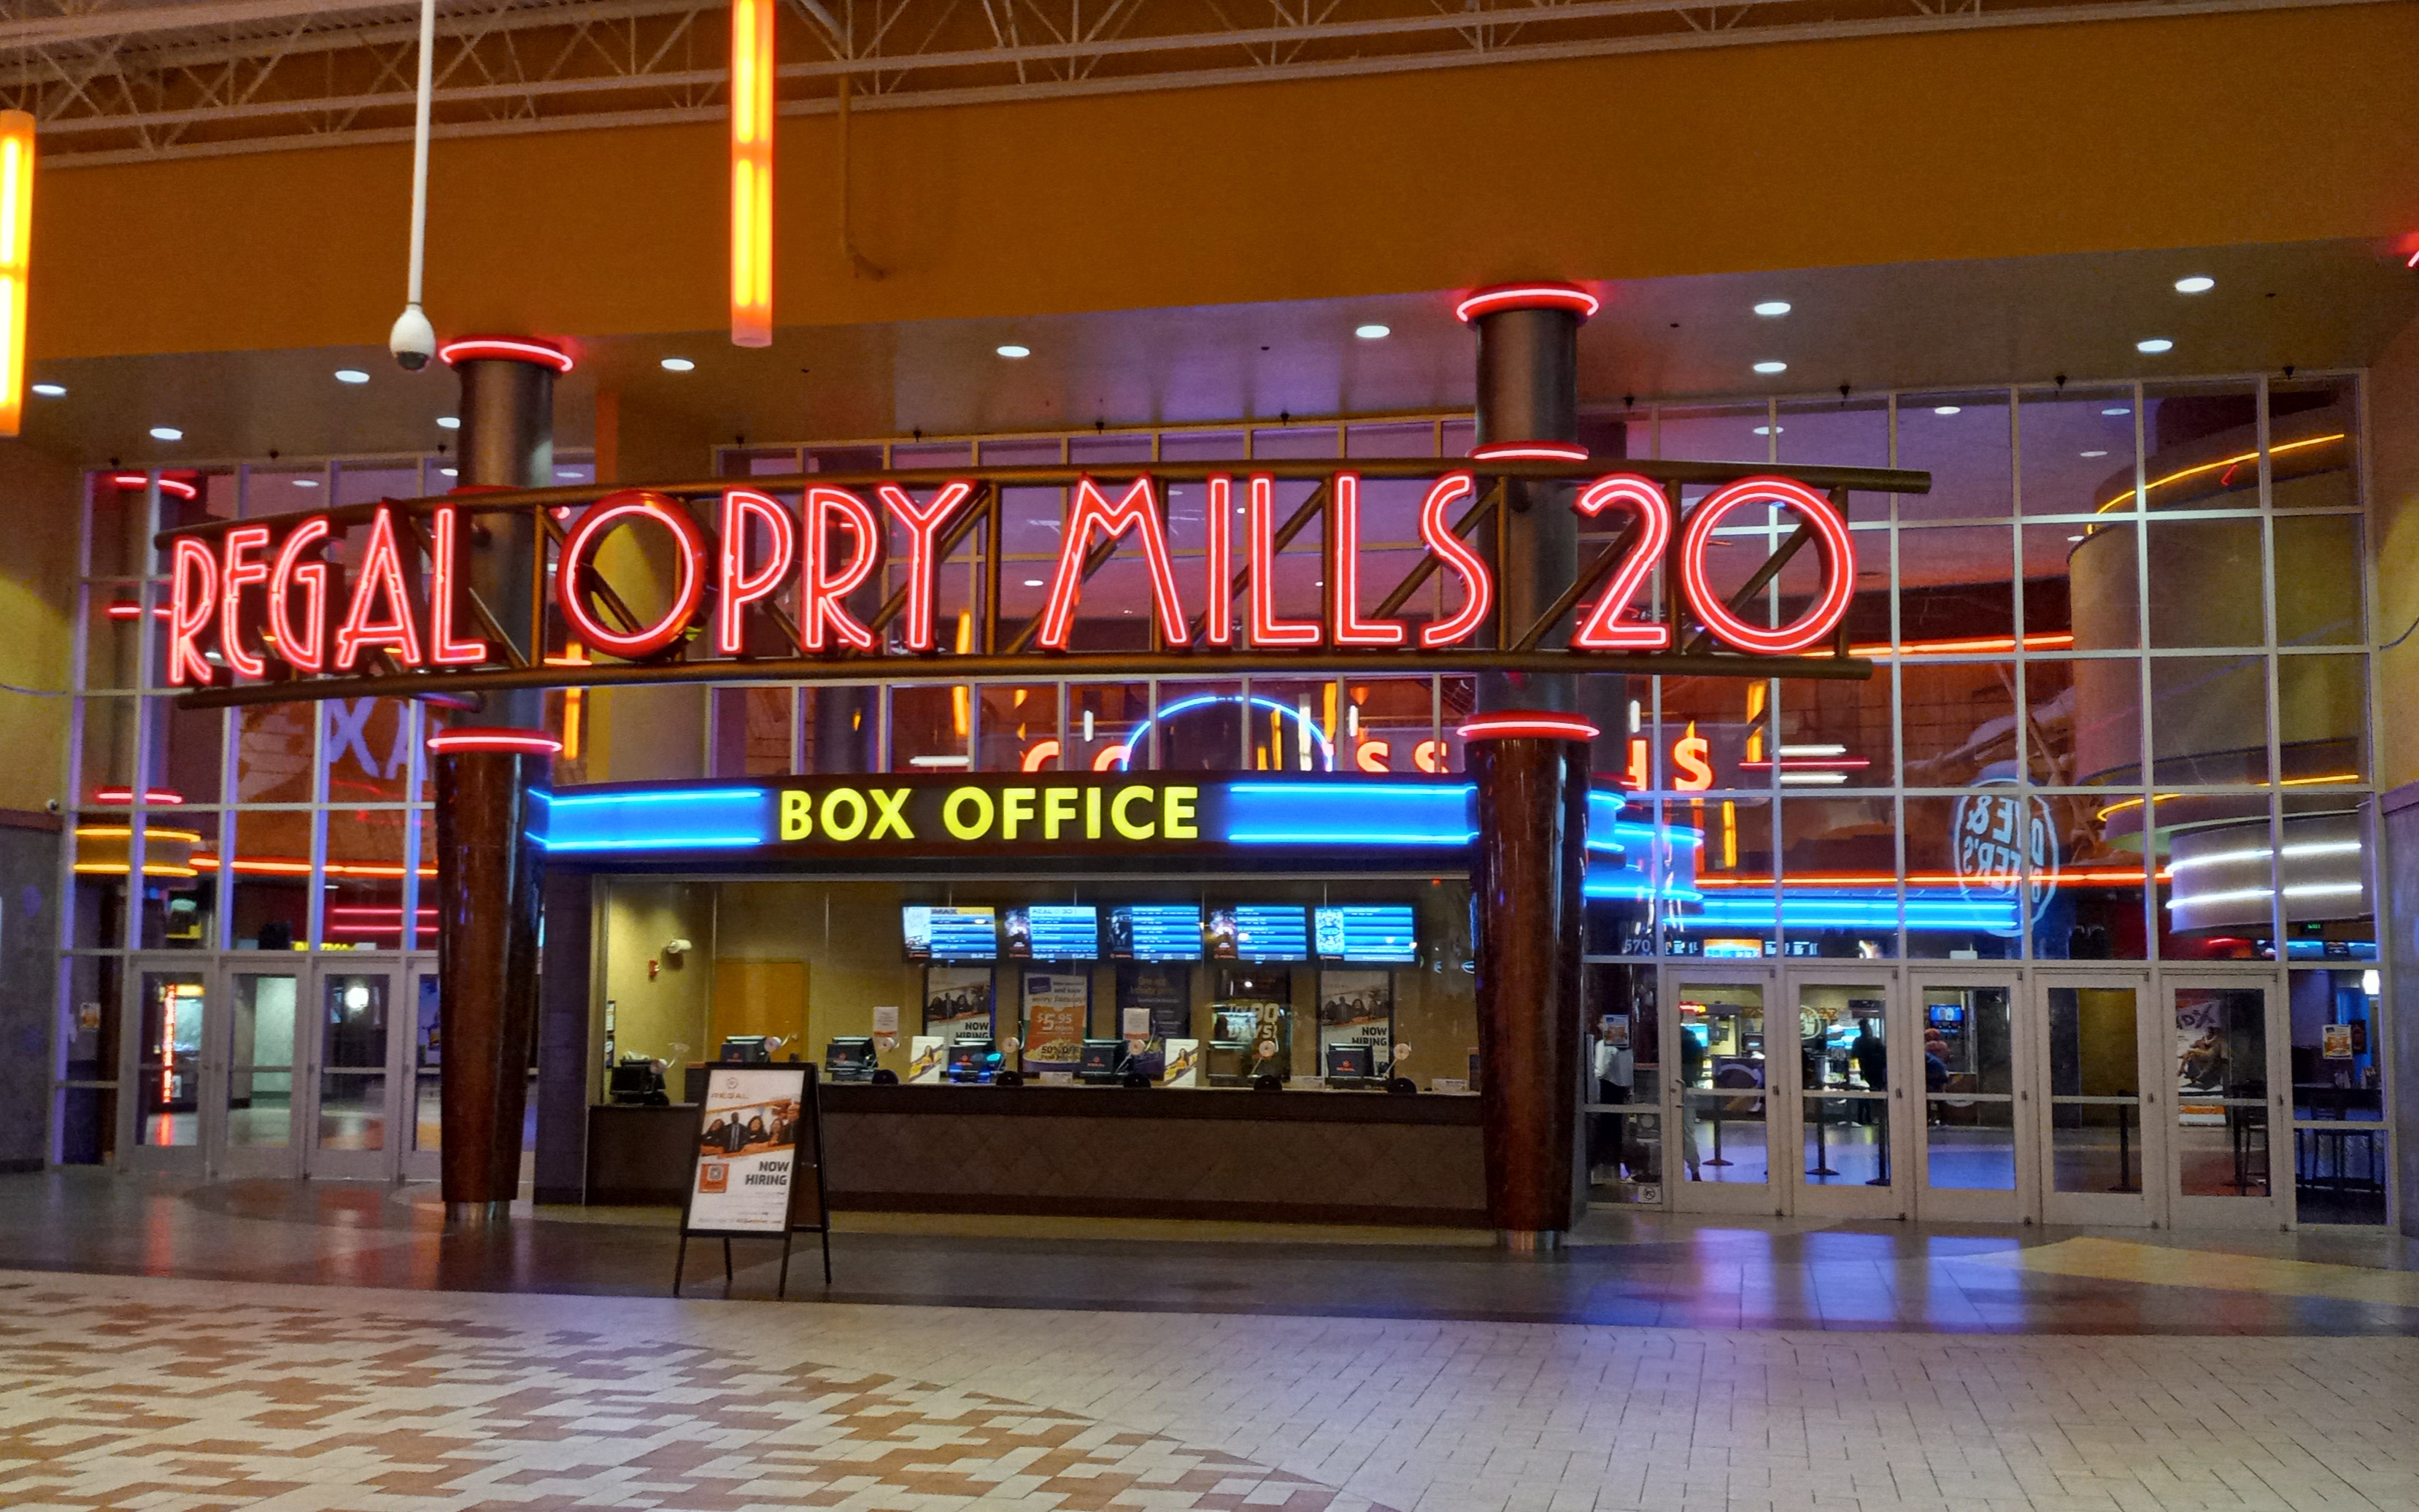 polo opry mills